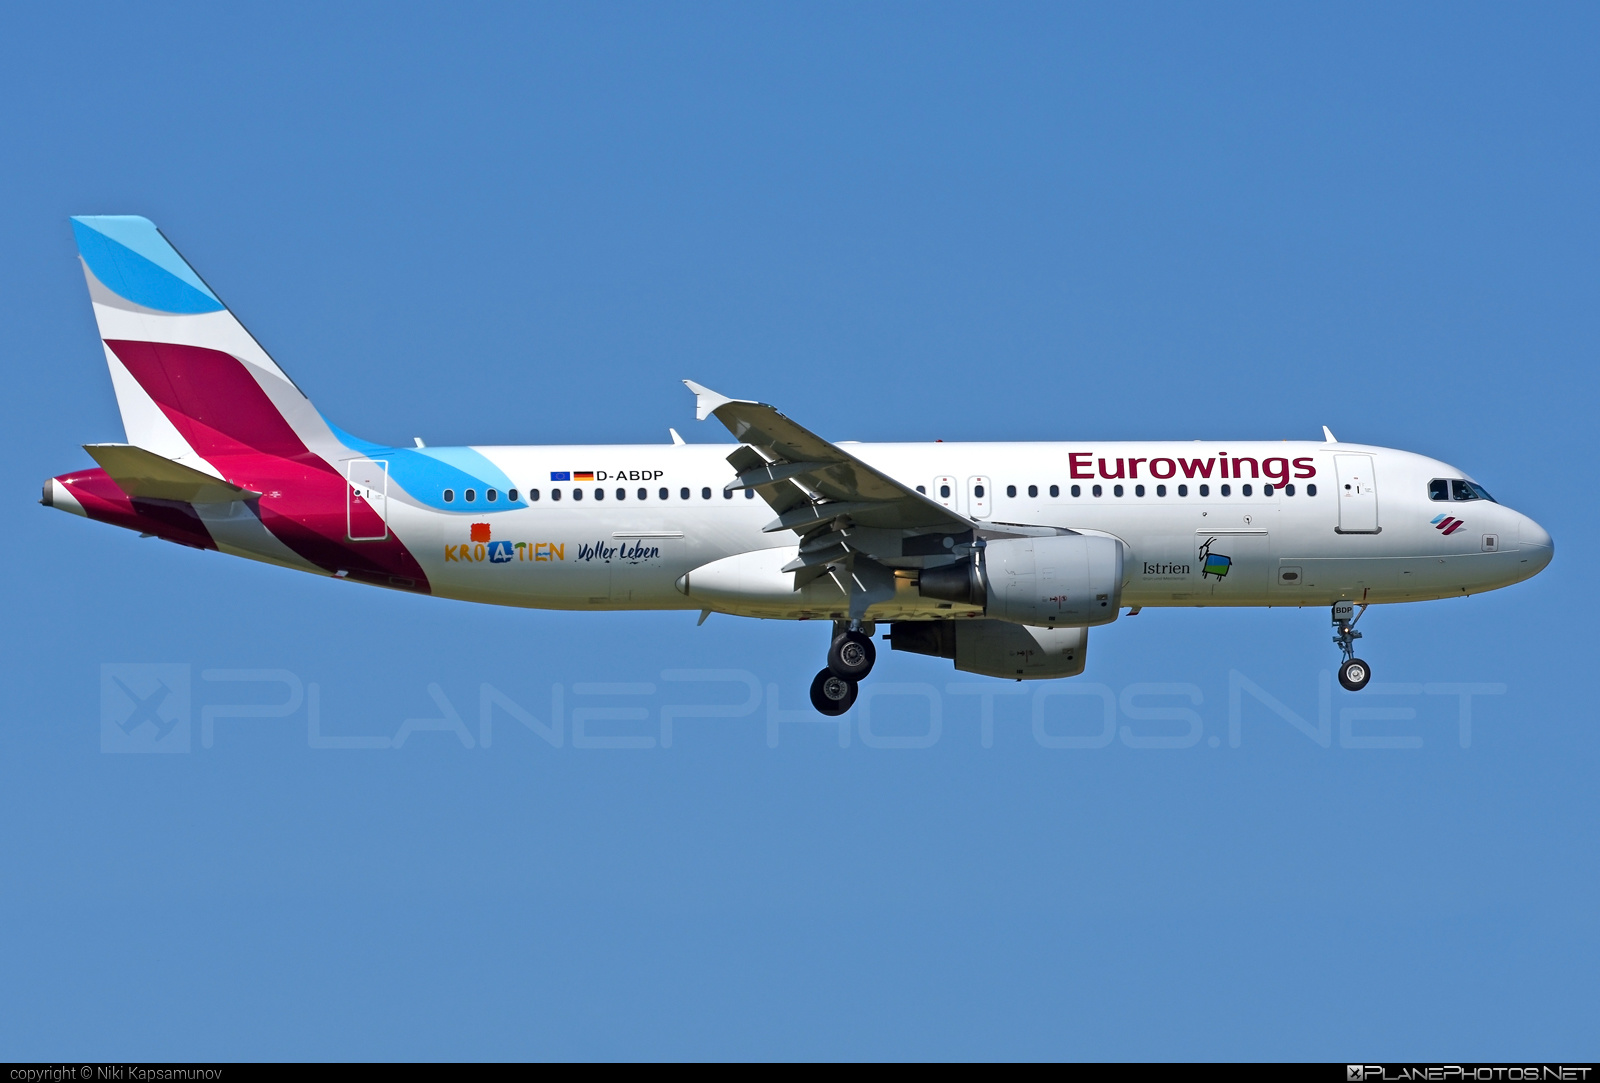 Airbus A320-214 - D-ABDP operated by Eurowings #a320 #a320family #airbus #airbus320 #eurowings